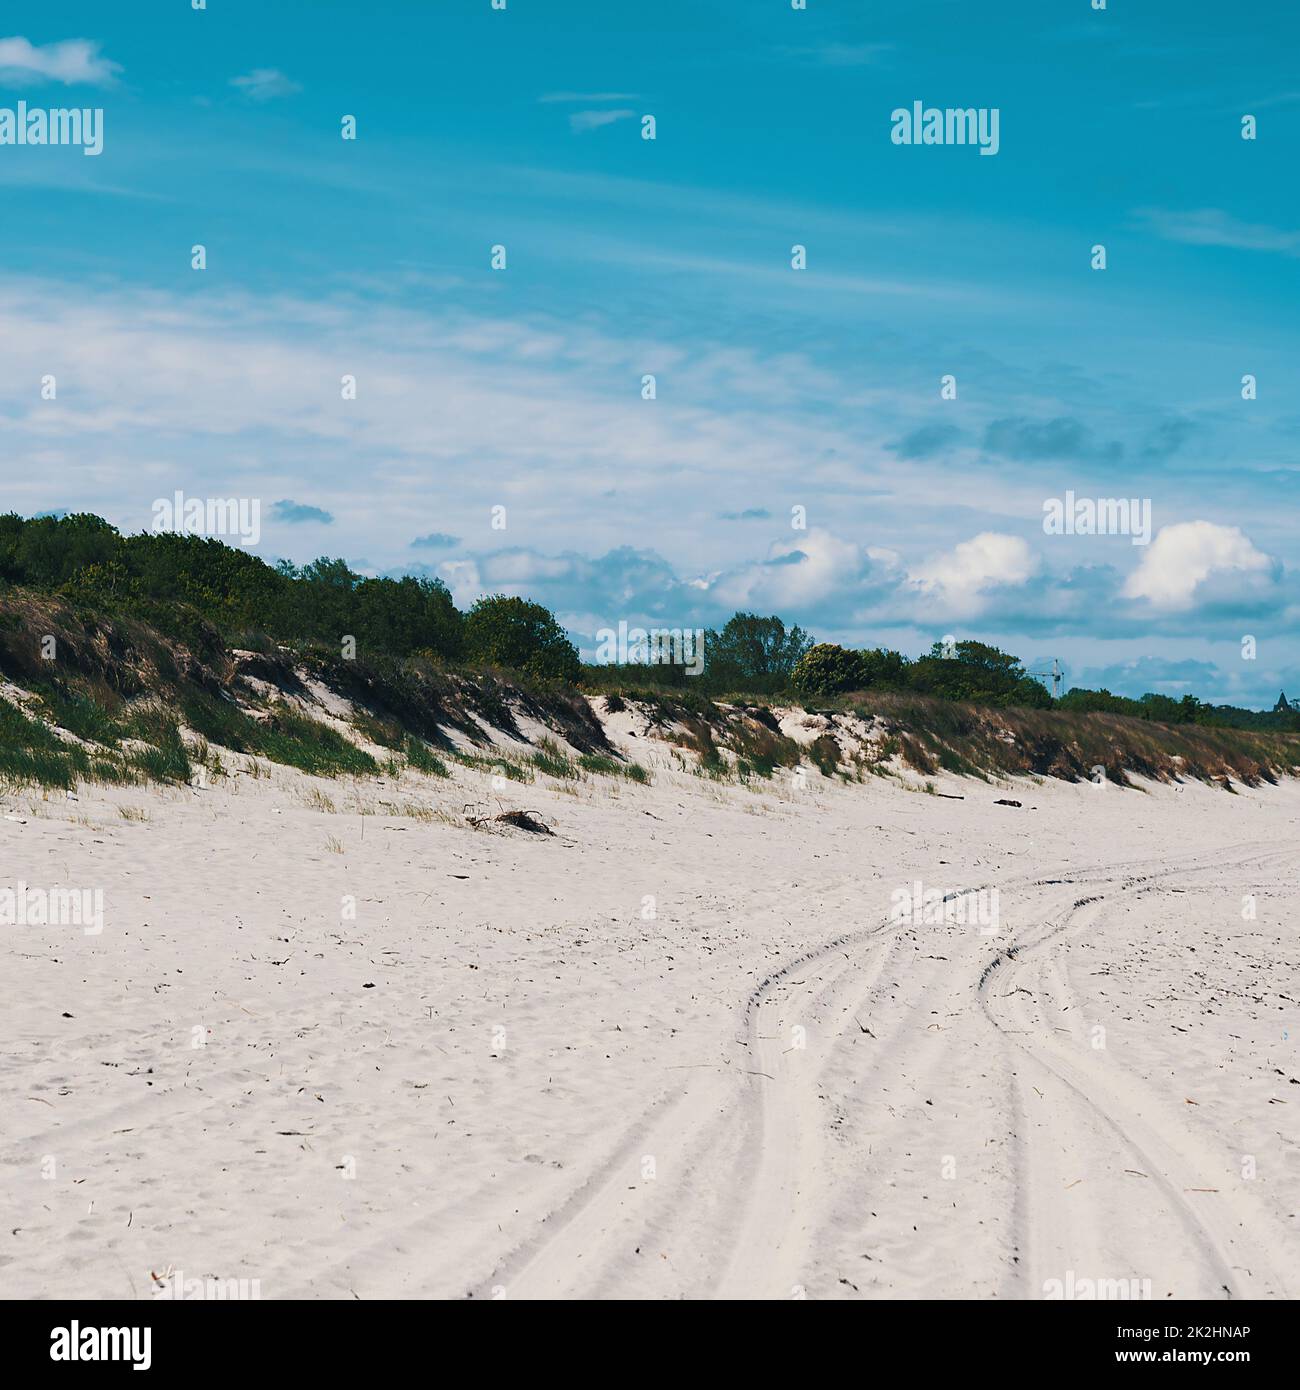 Dunes, overgrown with grass in places, car tracks on the sand. Blue sky with clouds Stock Photo